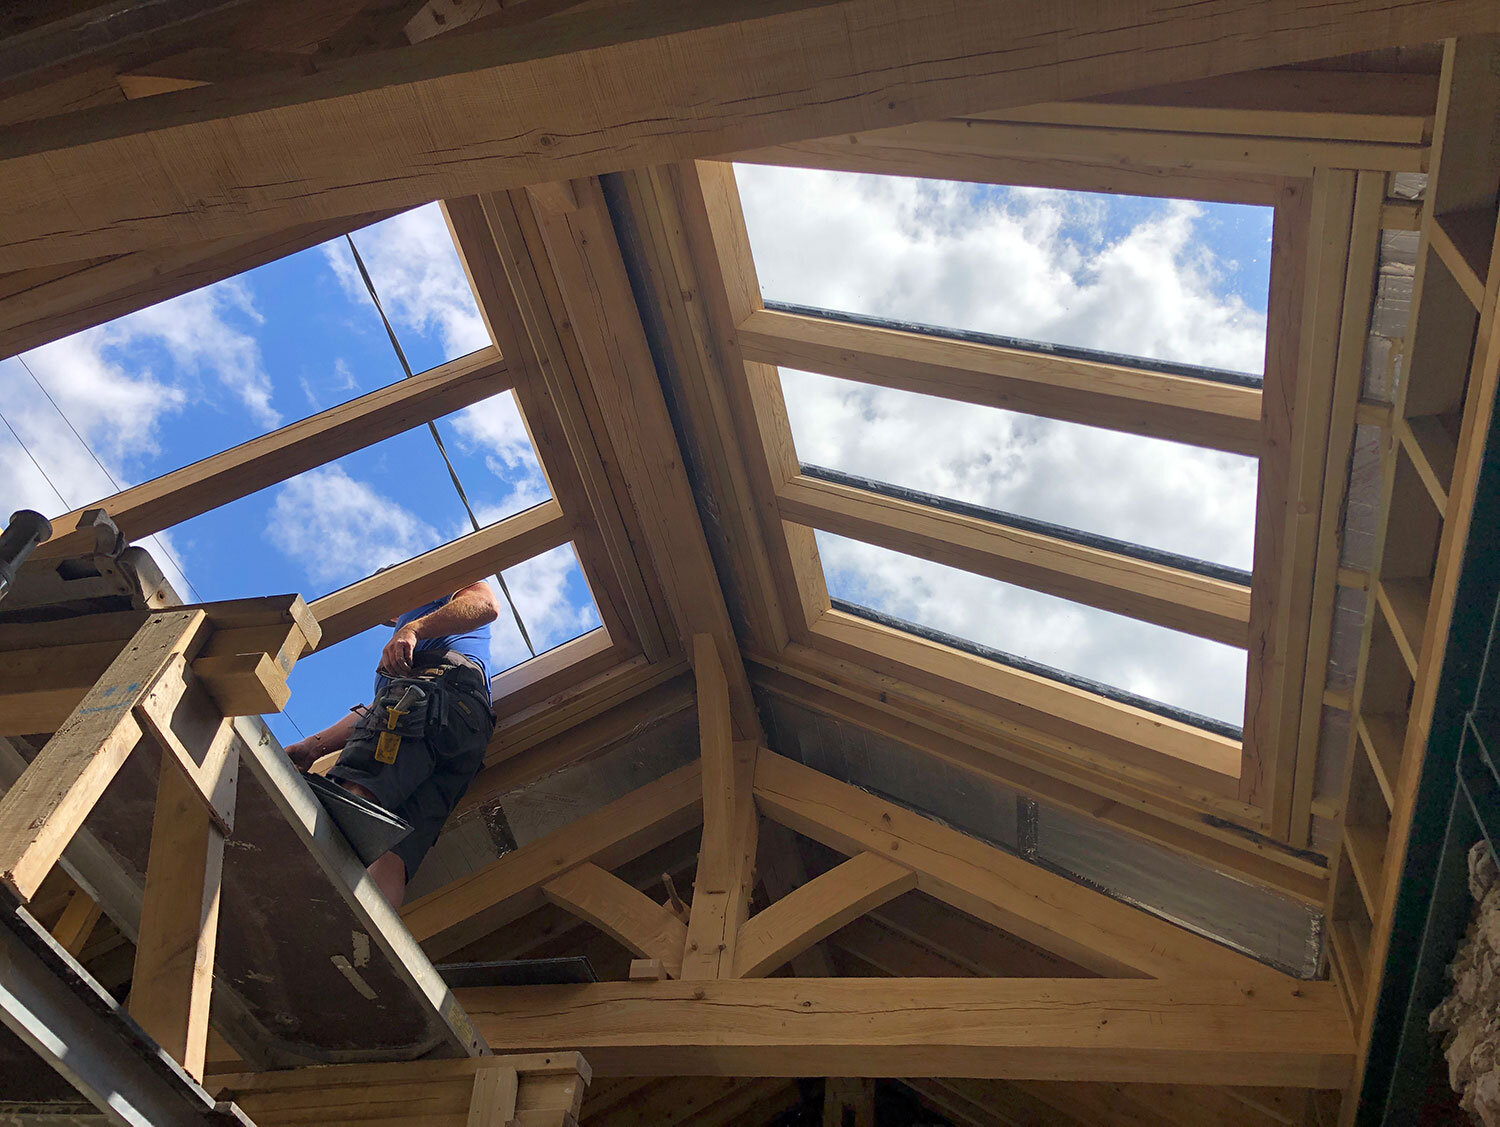 Green oak and purlin timber roof with windows and man